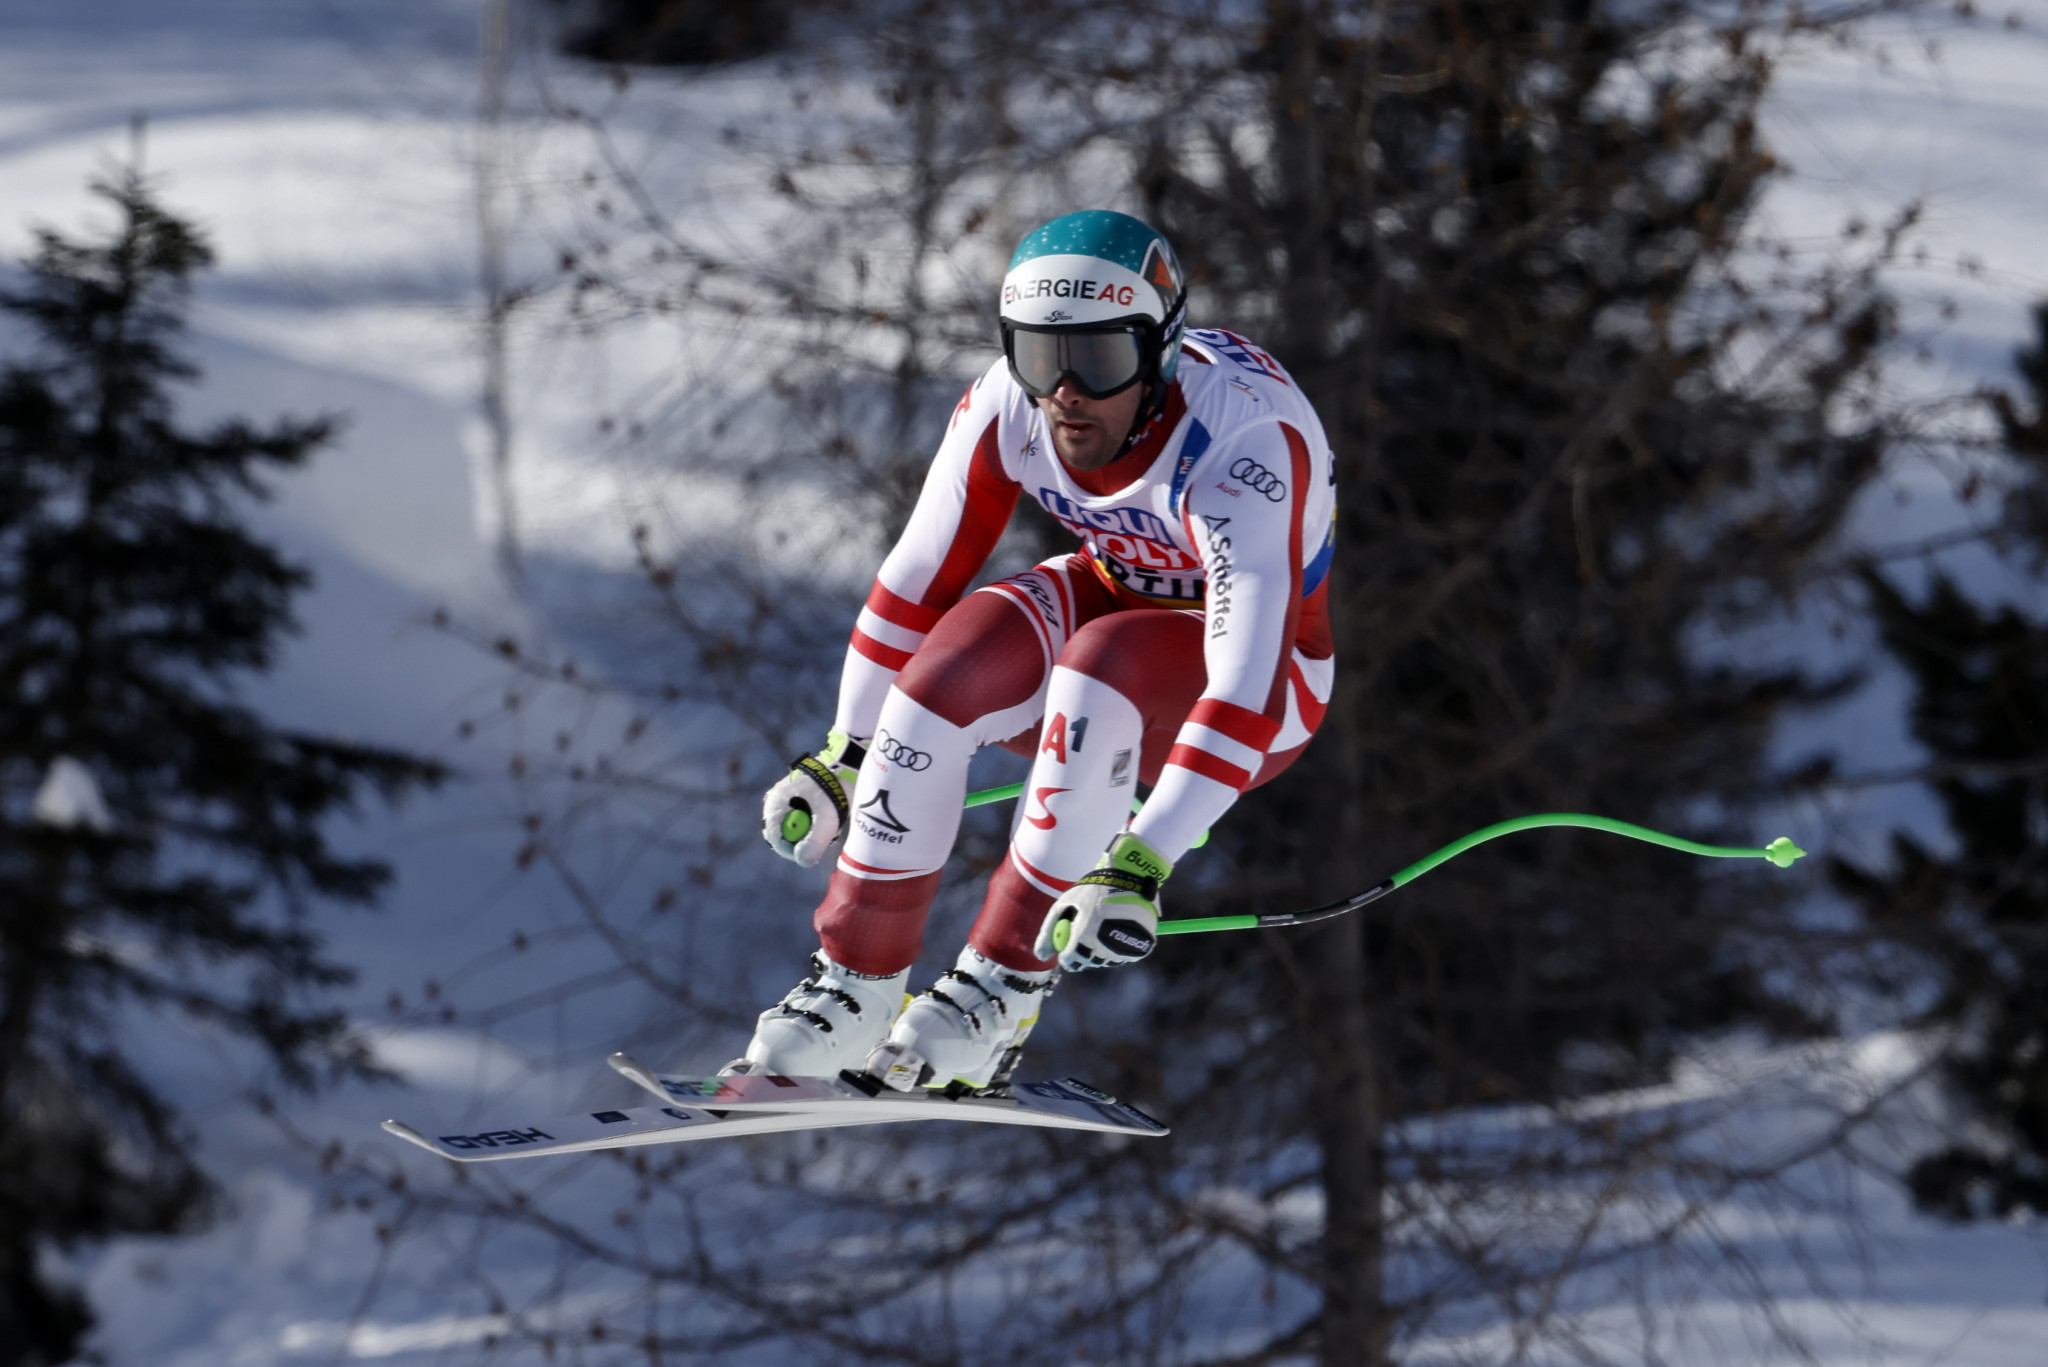 Kriechmayr earns rare double with downhill triumph at FIS Alpine World Ski Championships